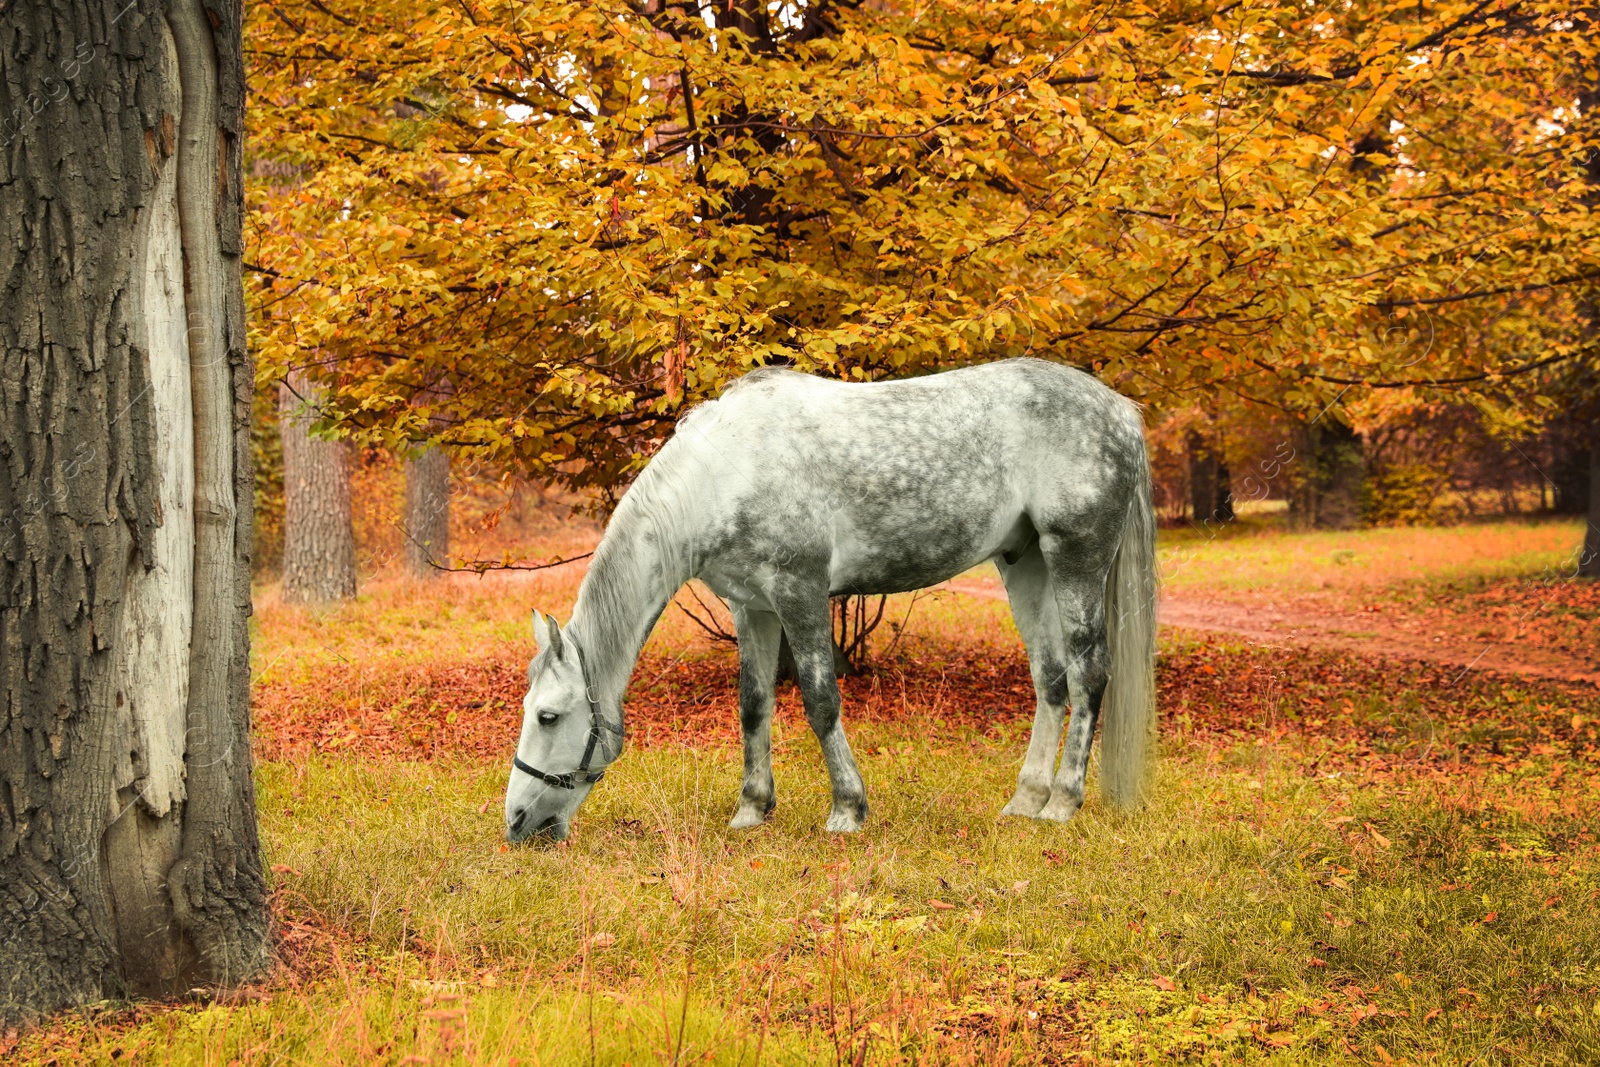 Photo of Horse with bridle in park on autumn day